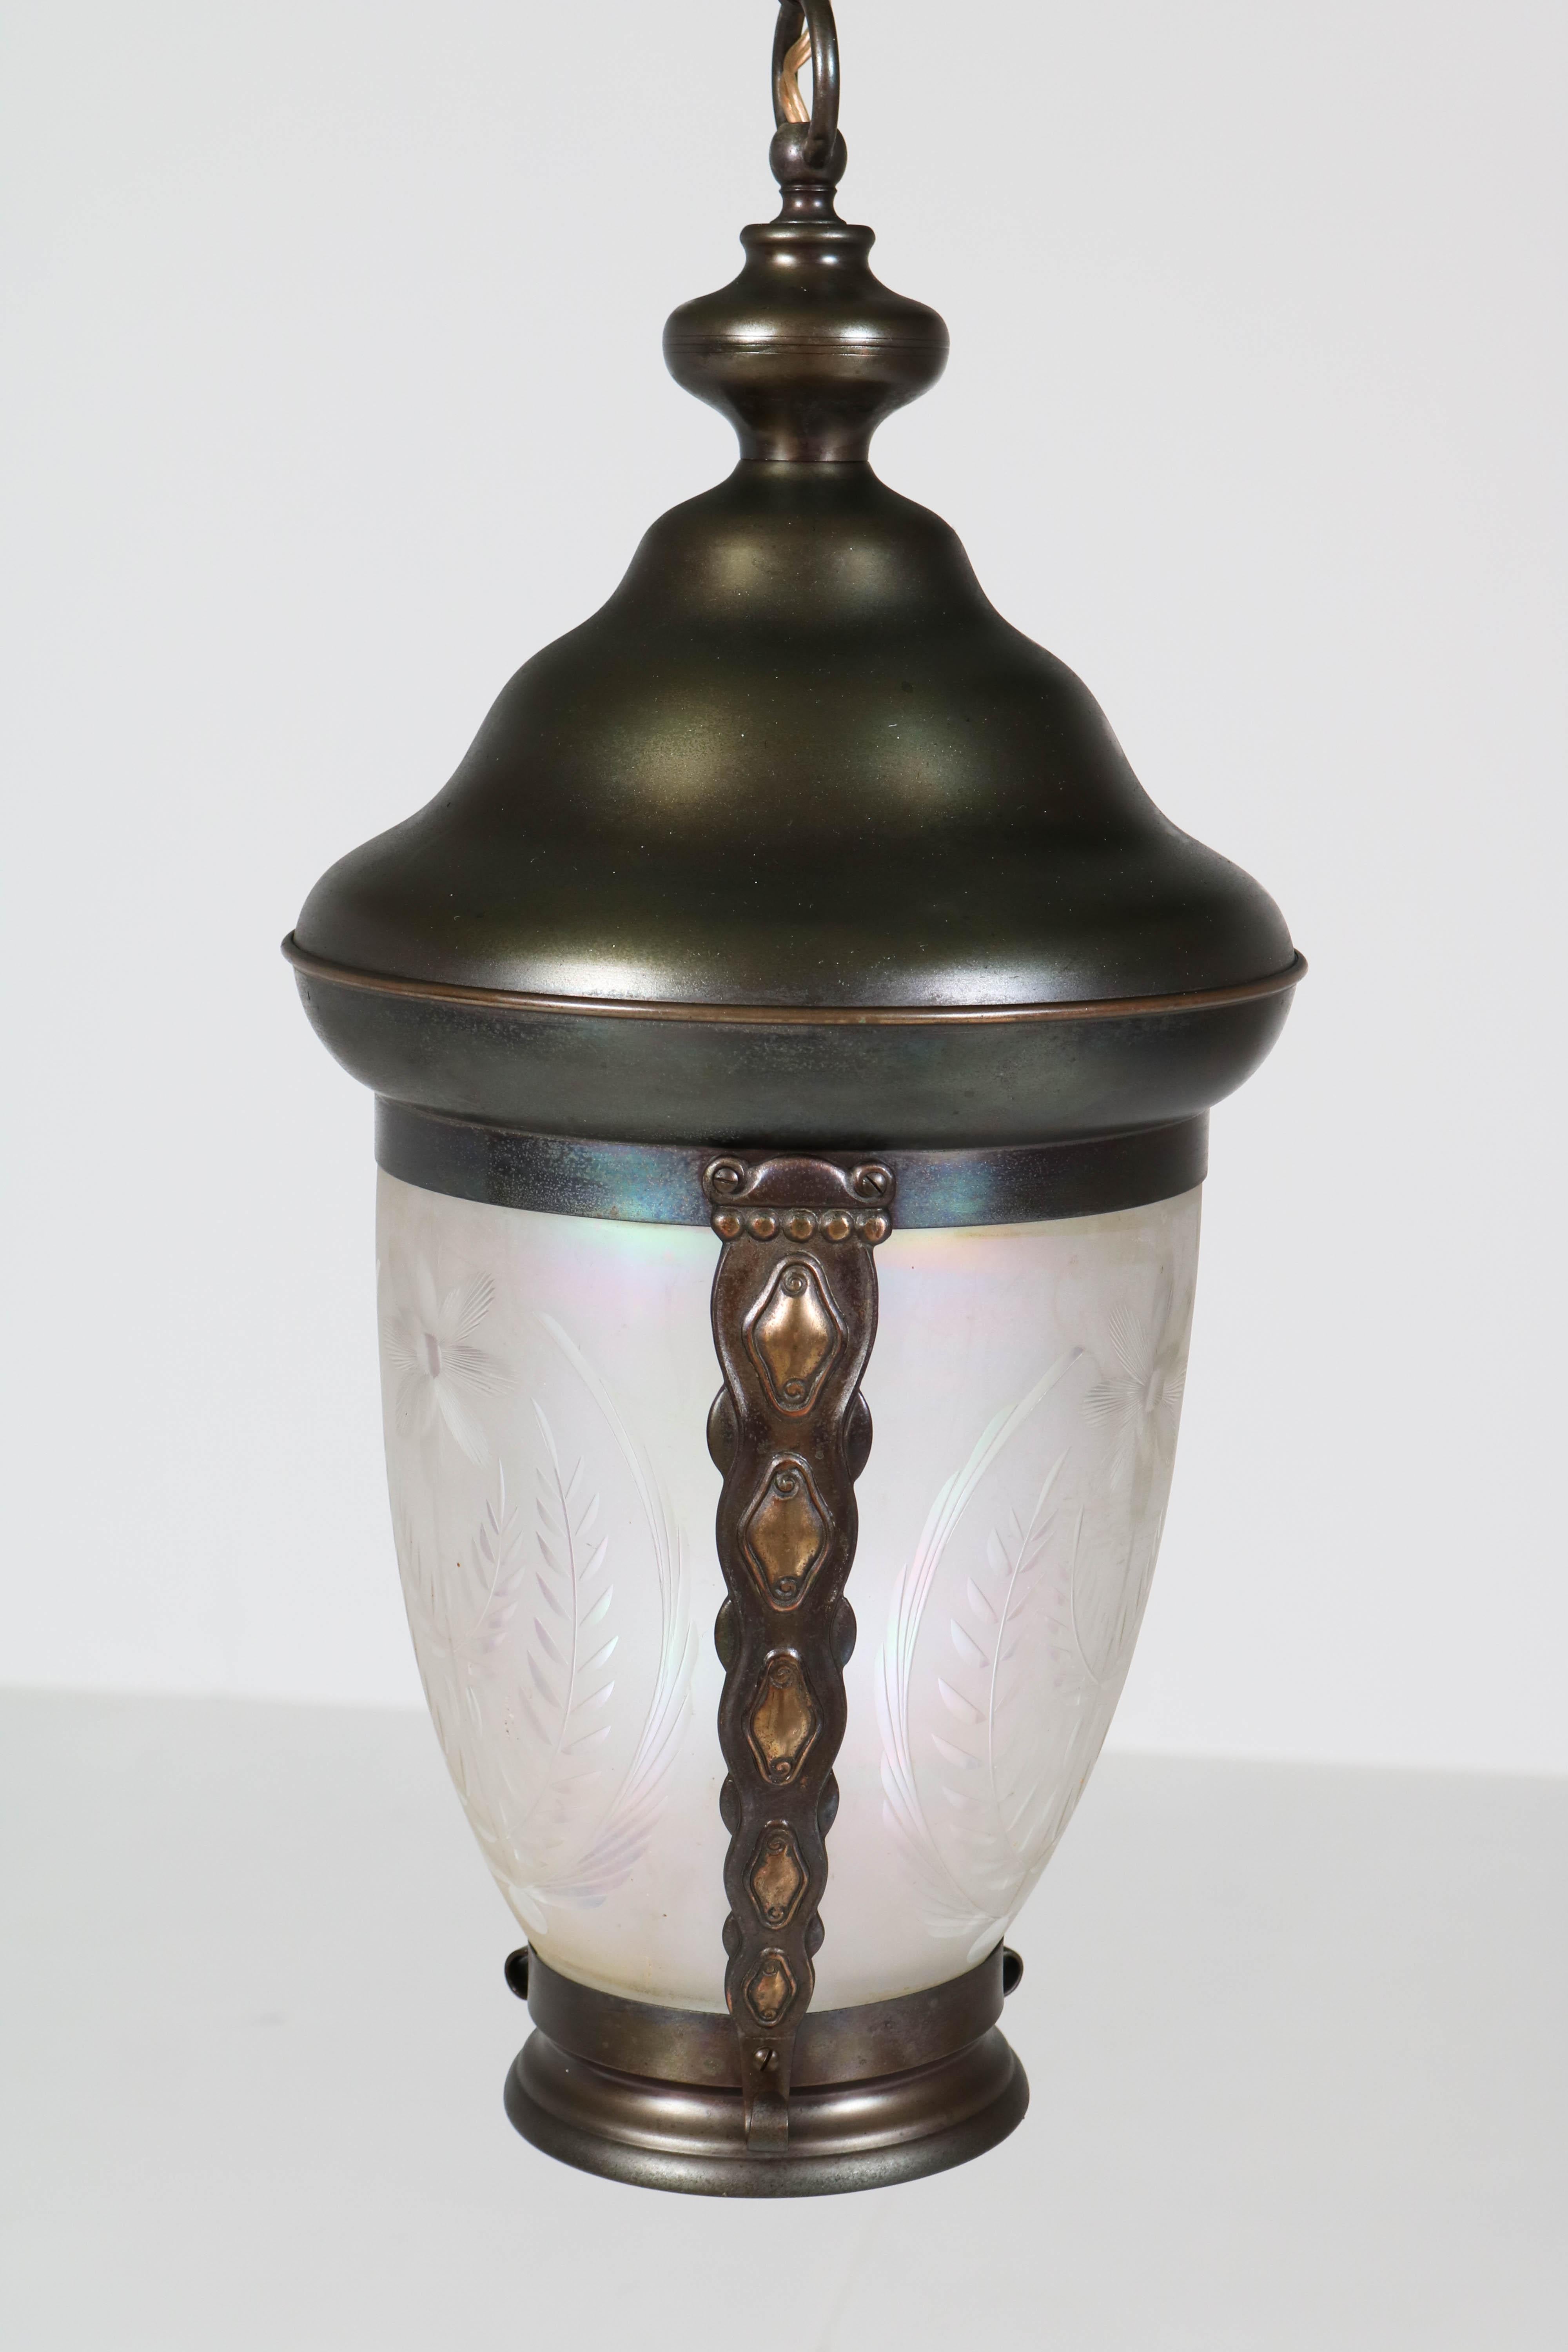 Brass Art Nouveau Lantern or Pendant Lamp with Petrol Glass Shade, 1900s For Sale 4